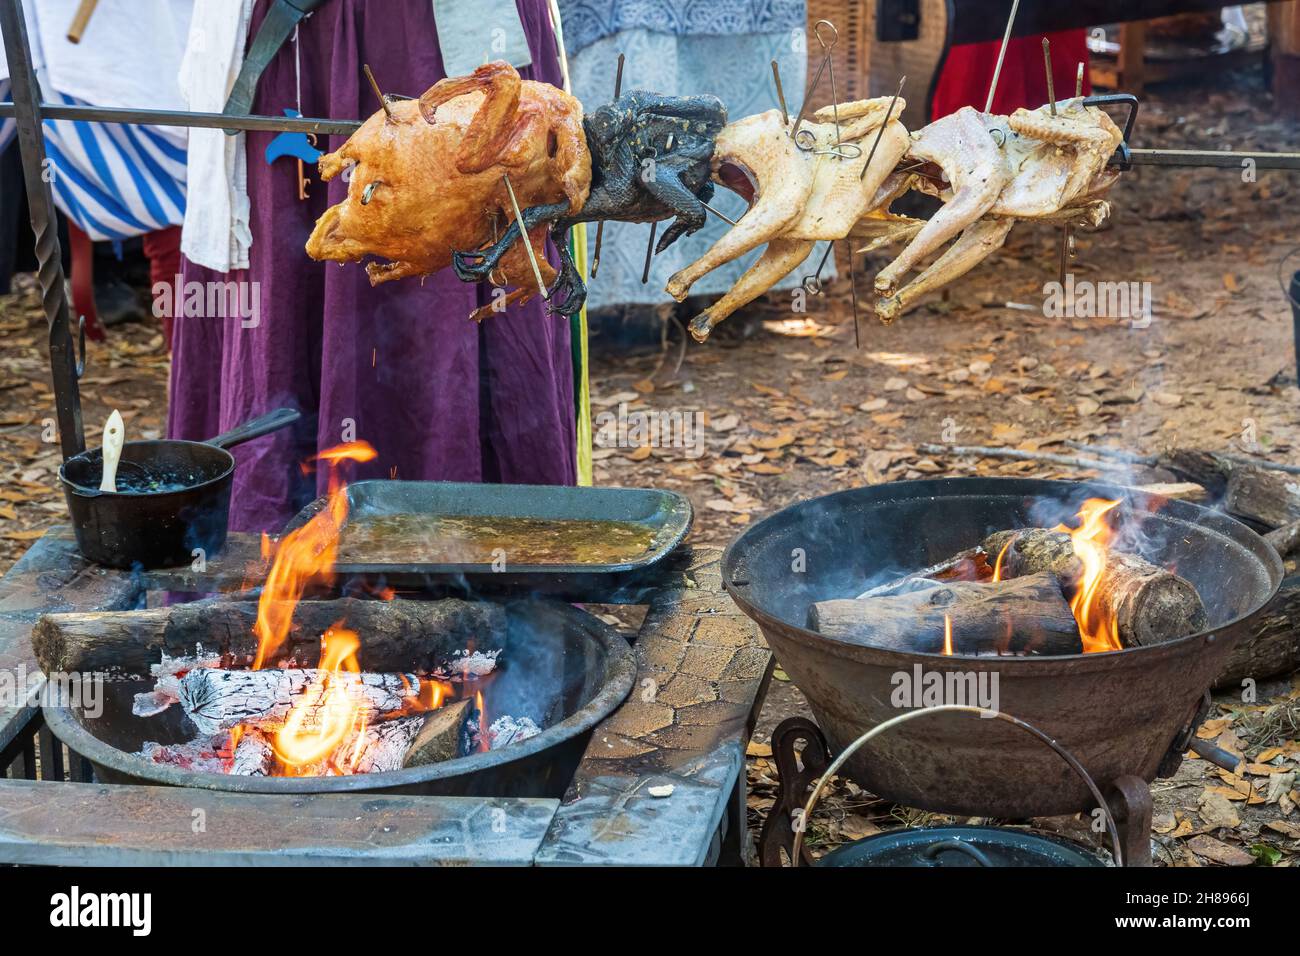 https://c8.alamy.com/comp/2H8966J/rotisserie-cooked-birds-on-a-spit-over-open-flame-fire-pits-florida-usa-2H8966J.jpg